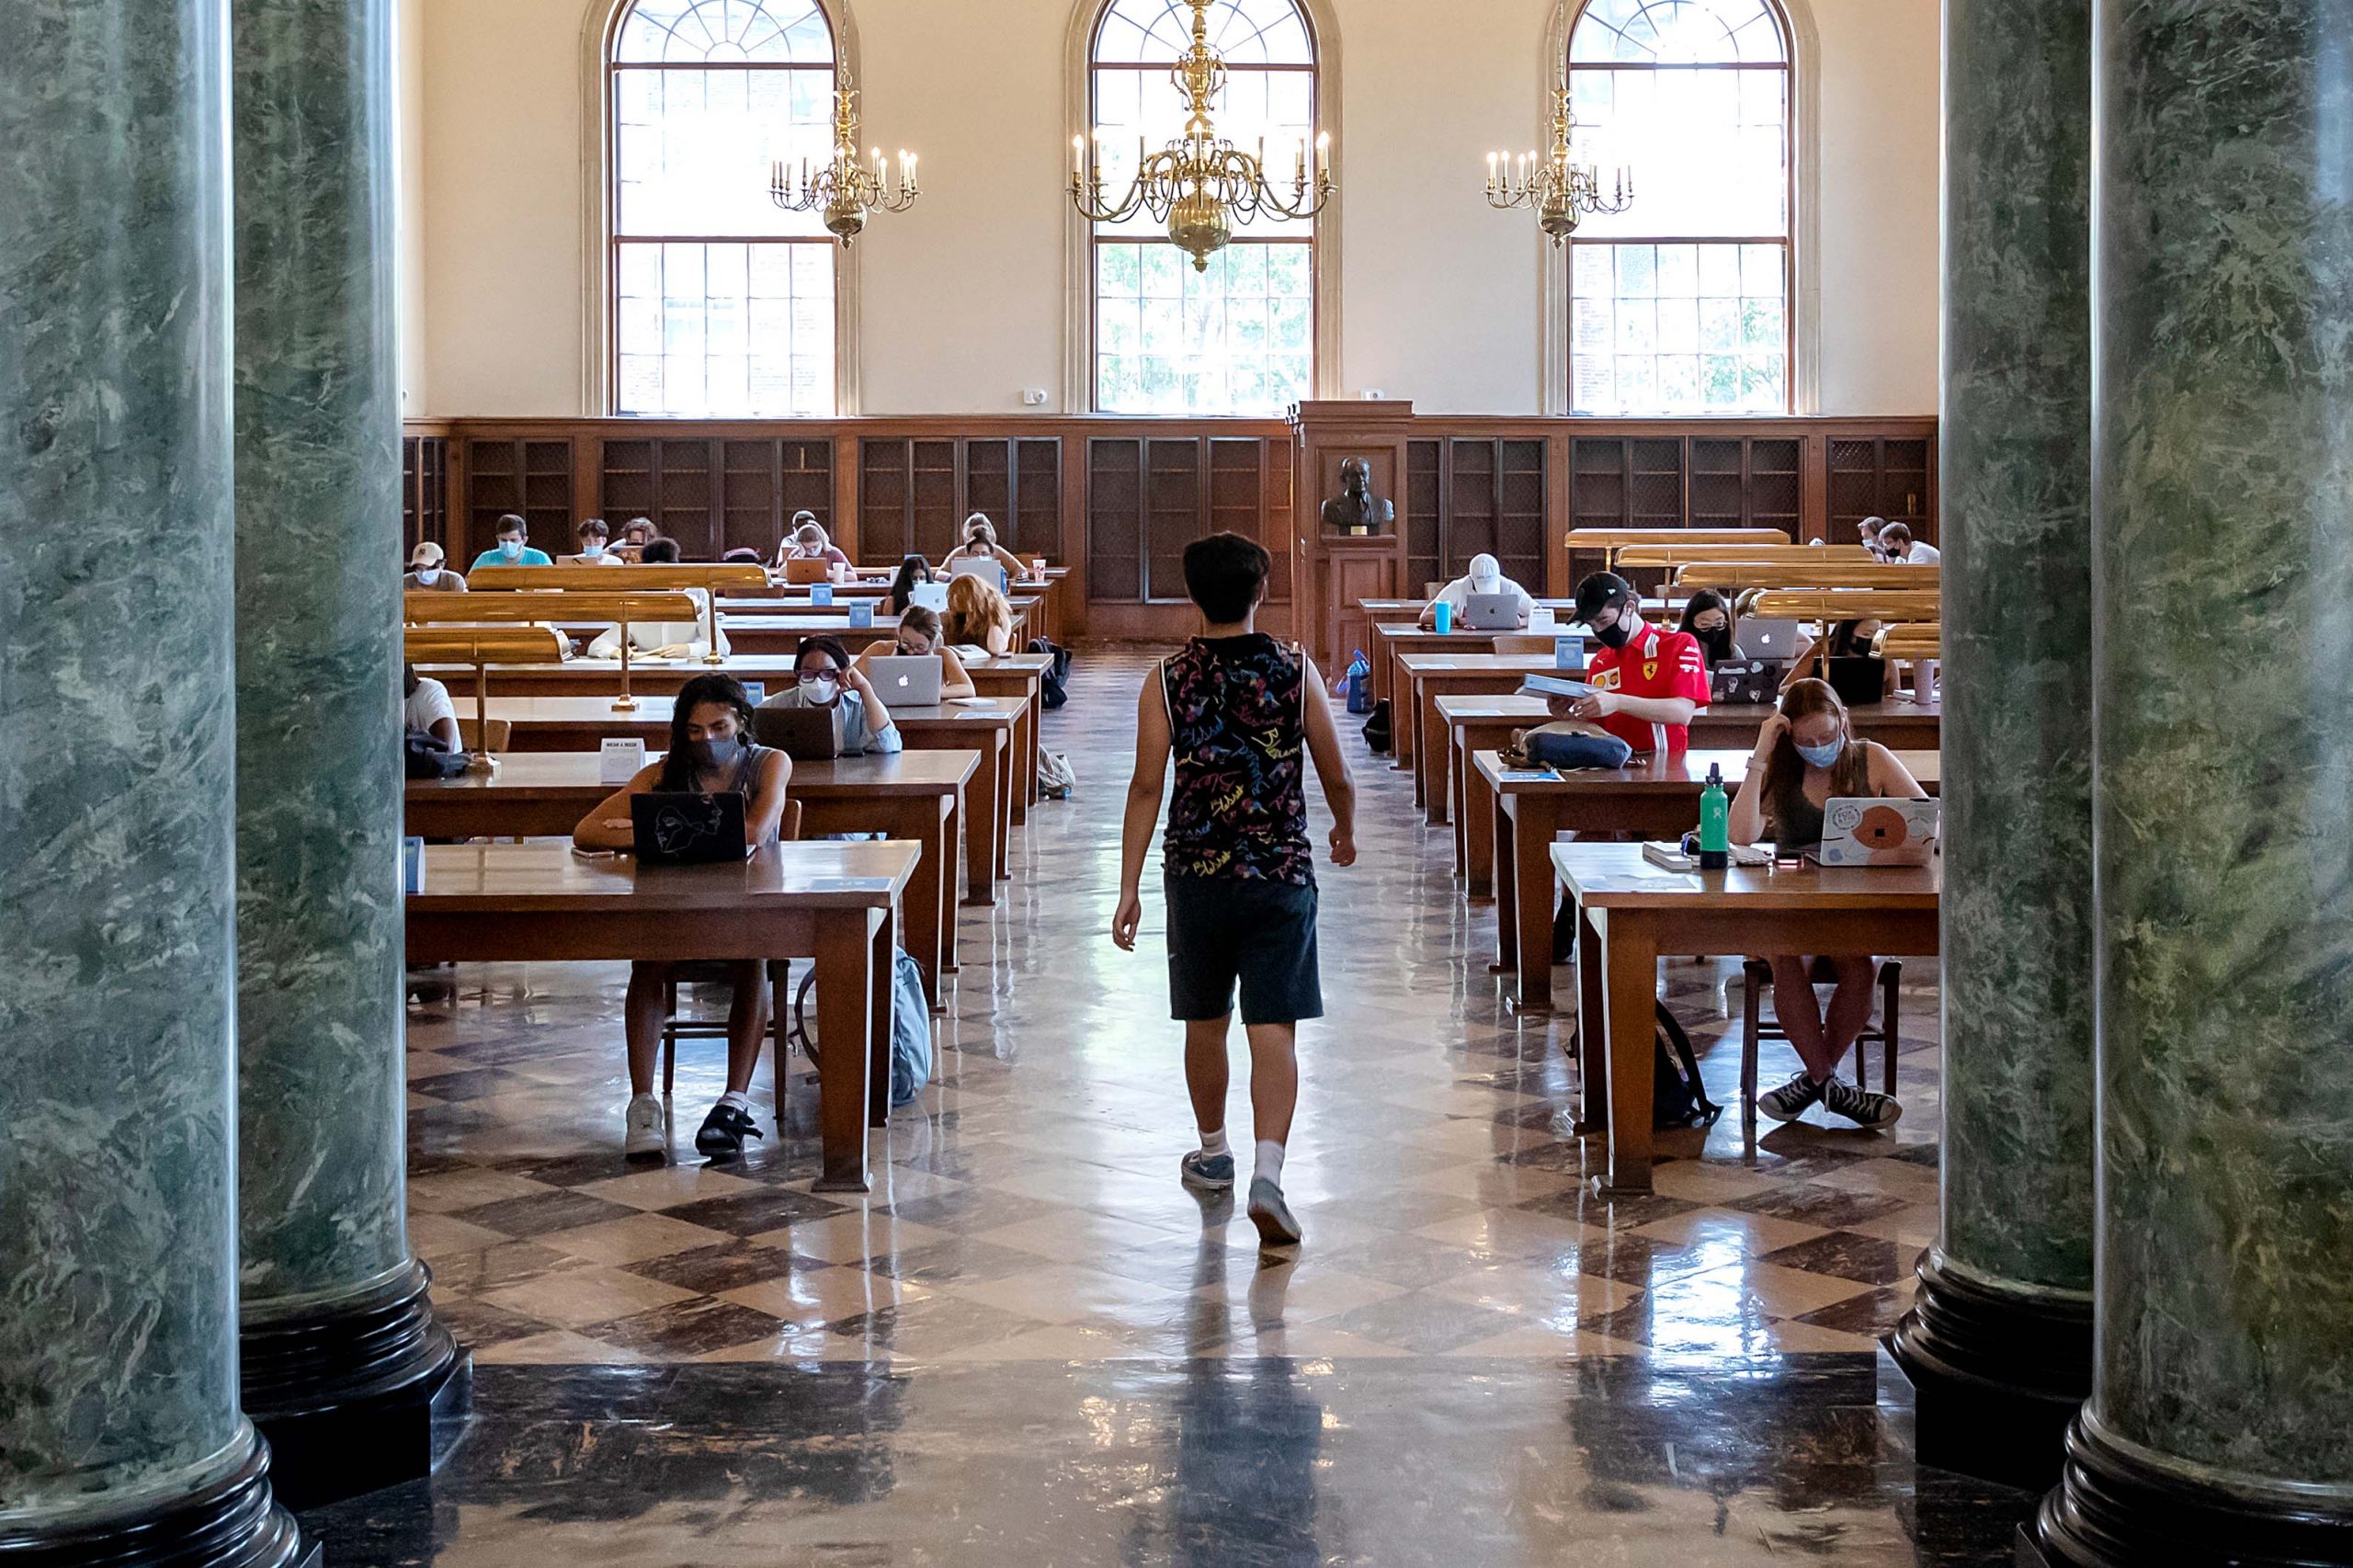 Wilson Library Fearrington Reading Room filled with studying students